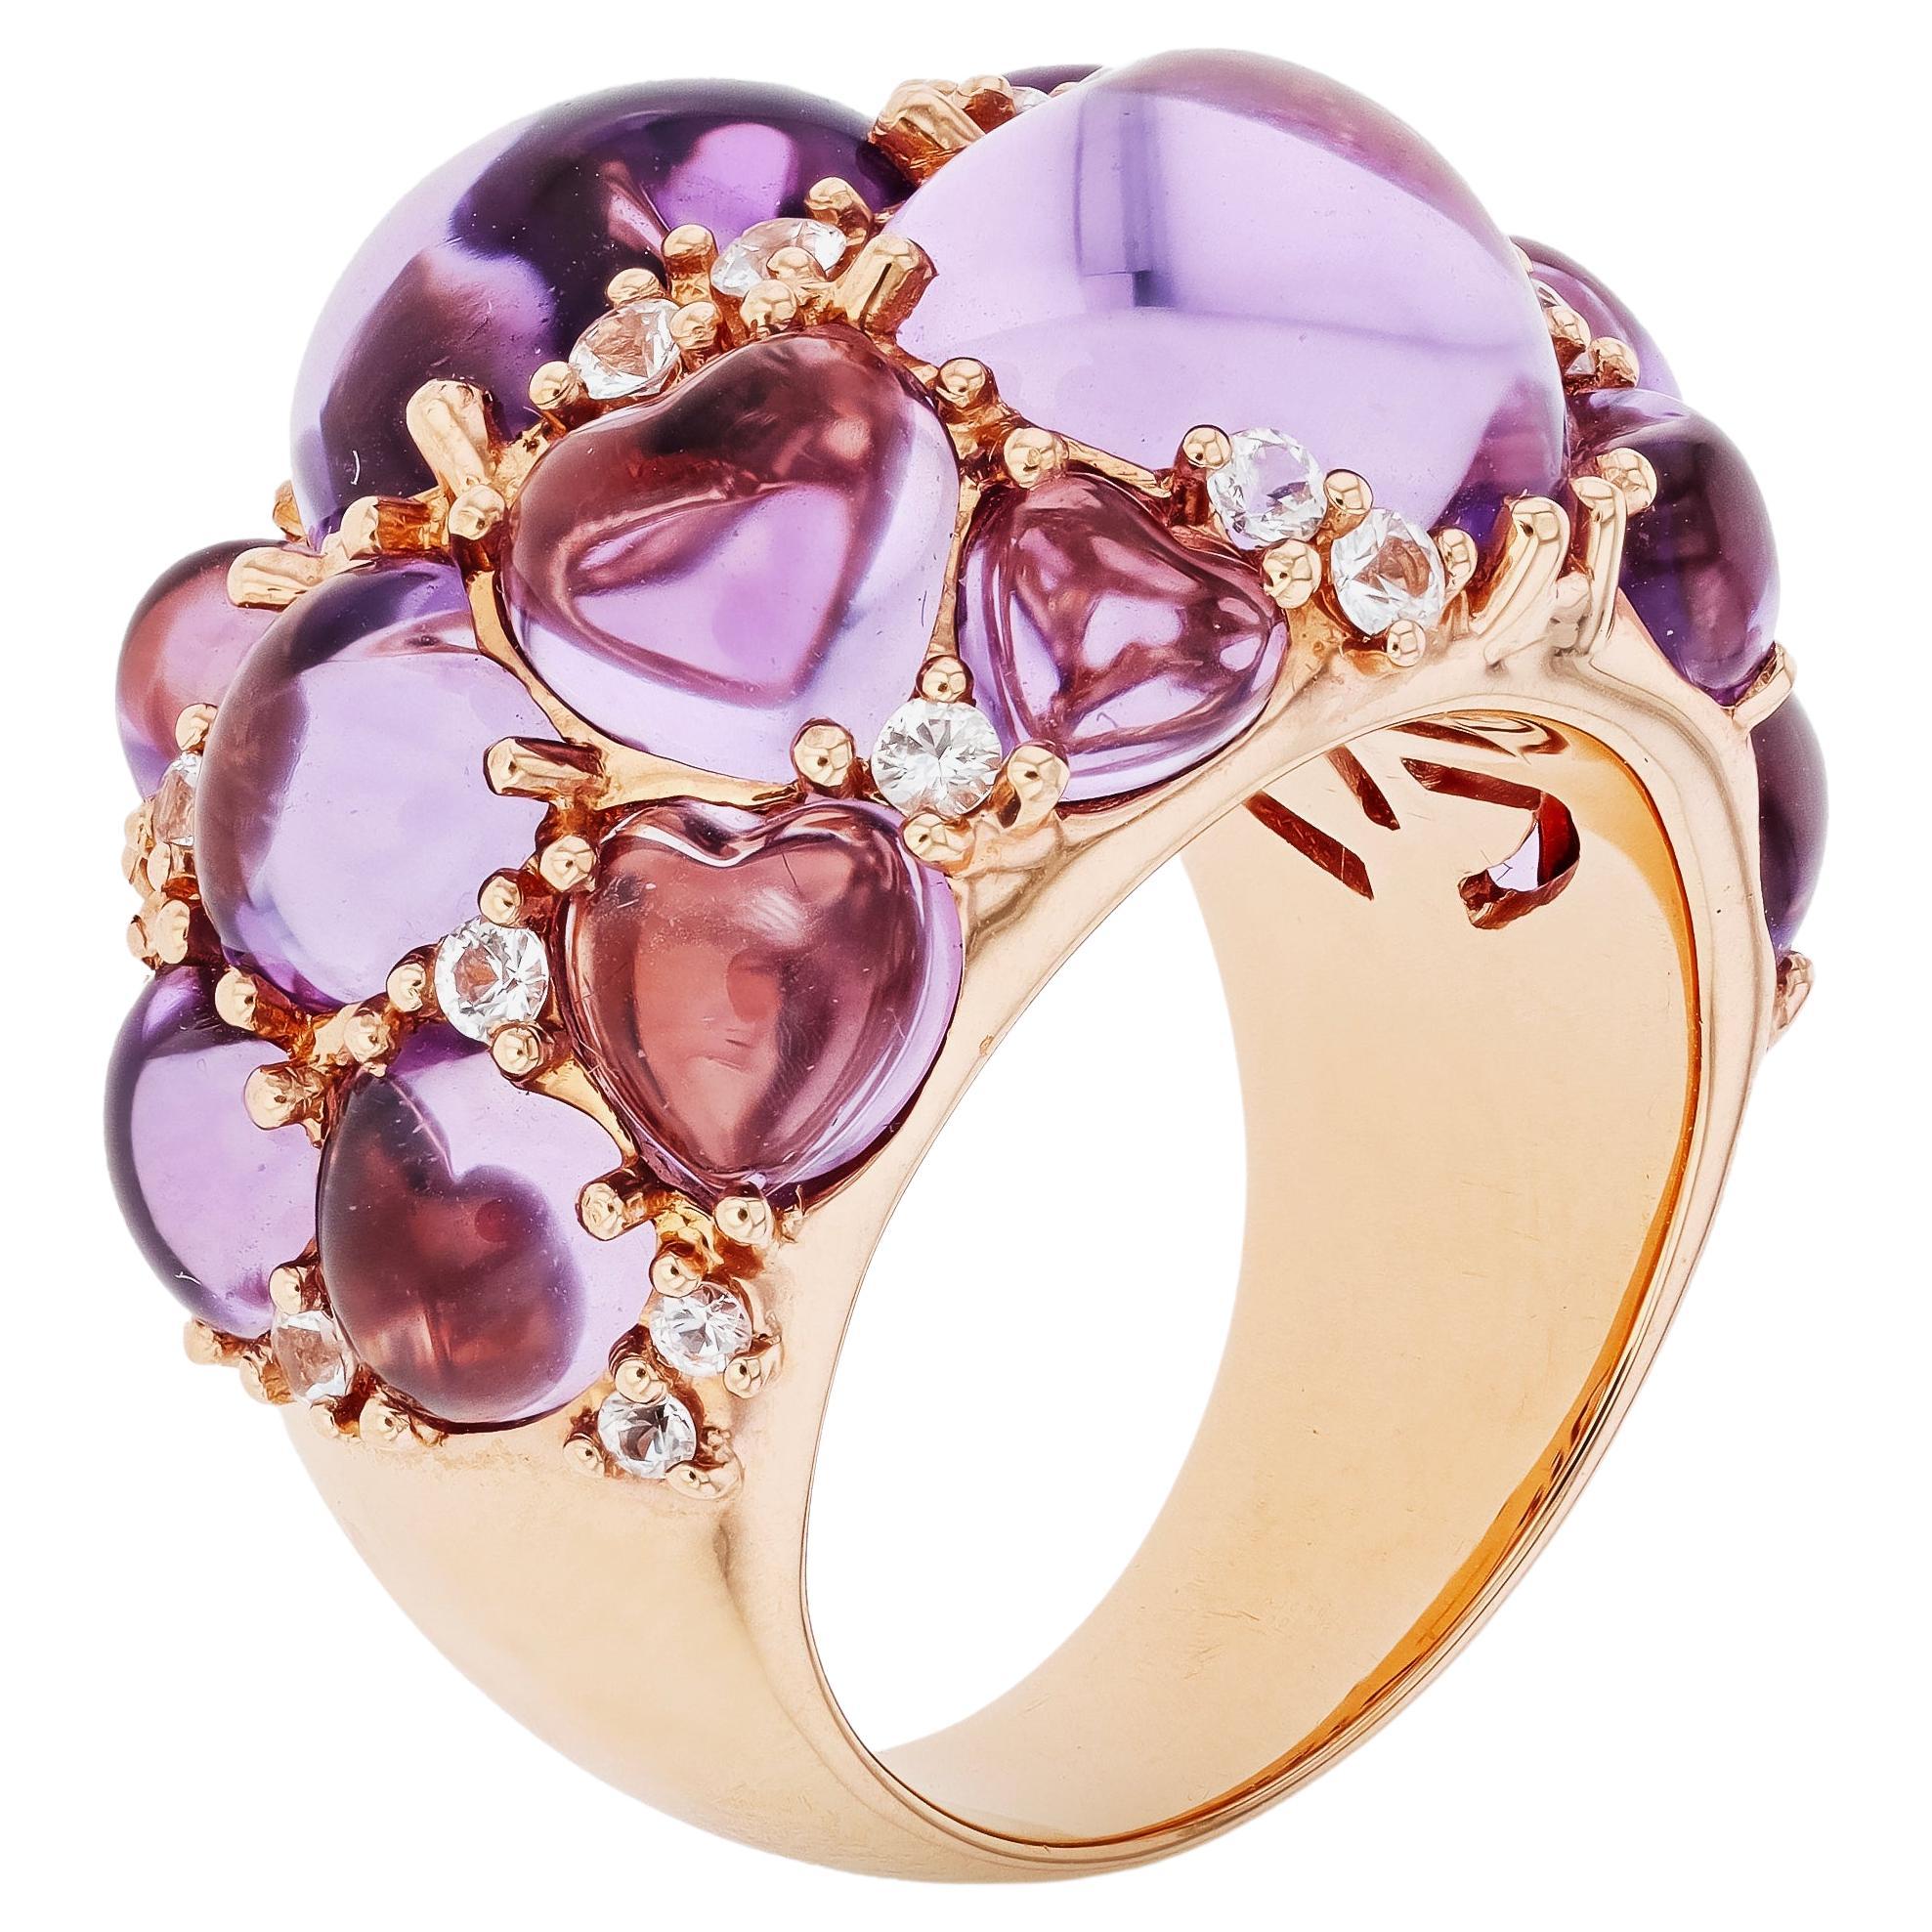 Mimi Milano Juliet 18K Rose Gold Cabochon Amethyst & Sapphire Ring s 6.25 For Sale